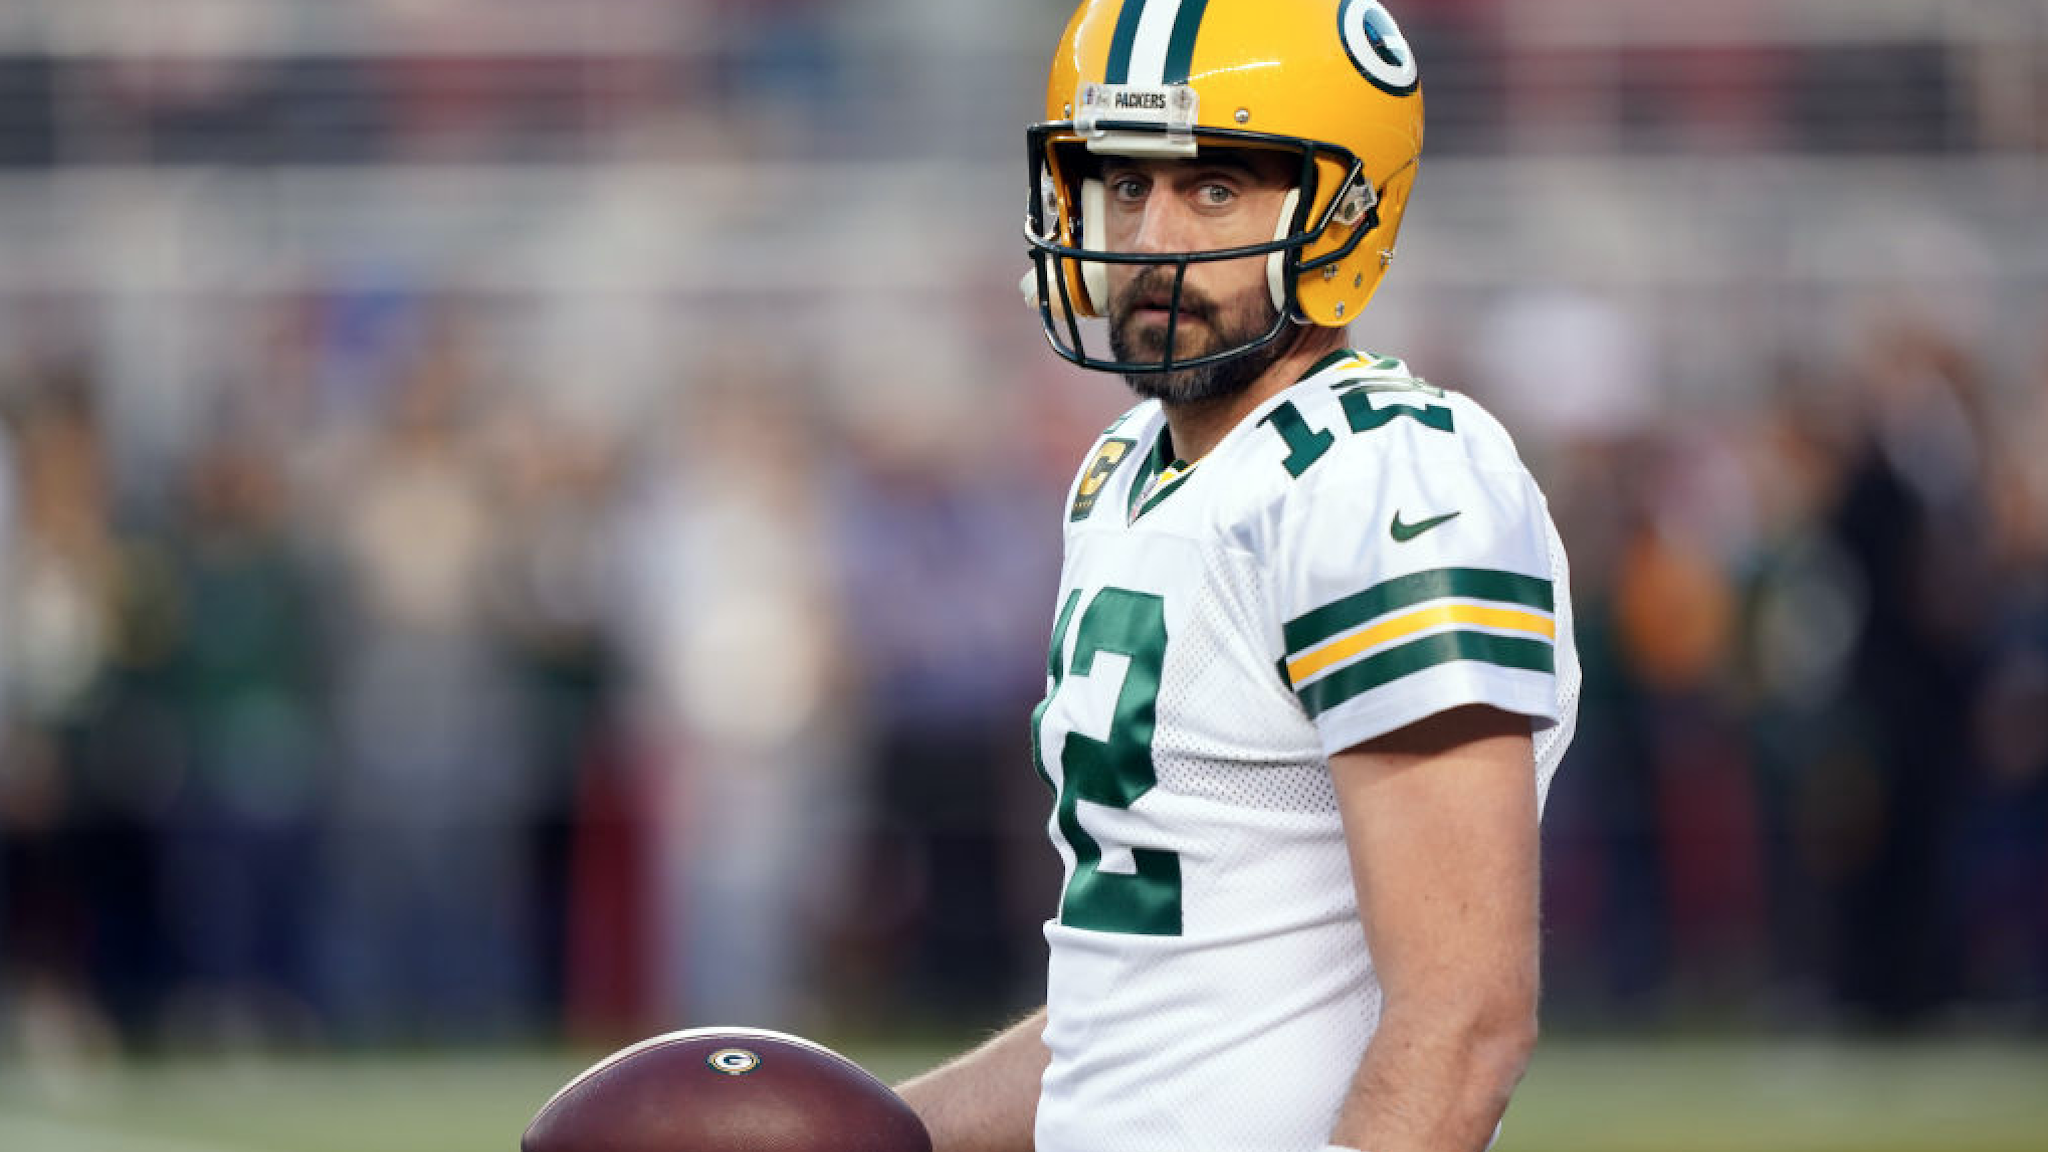 Quarterback Aaron Rodgers #12 of the Green Bay Packers warms up prior to the game against the San Francisco 49ers at Levi's Stadium on November 24, 2019 in Santa Clara, California. (